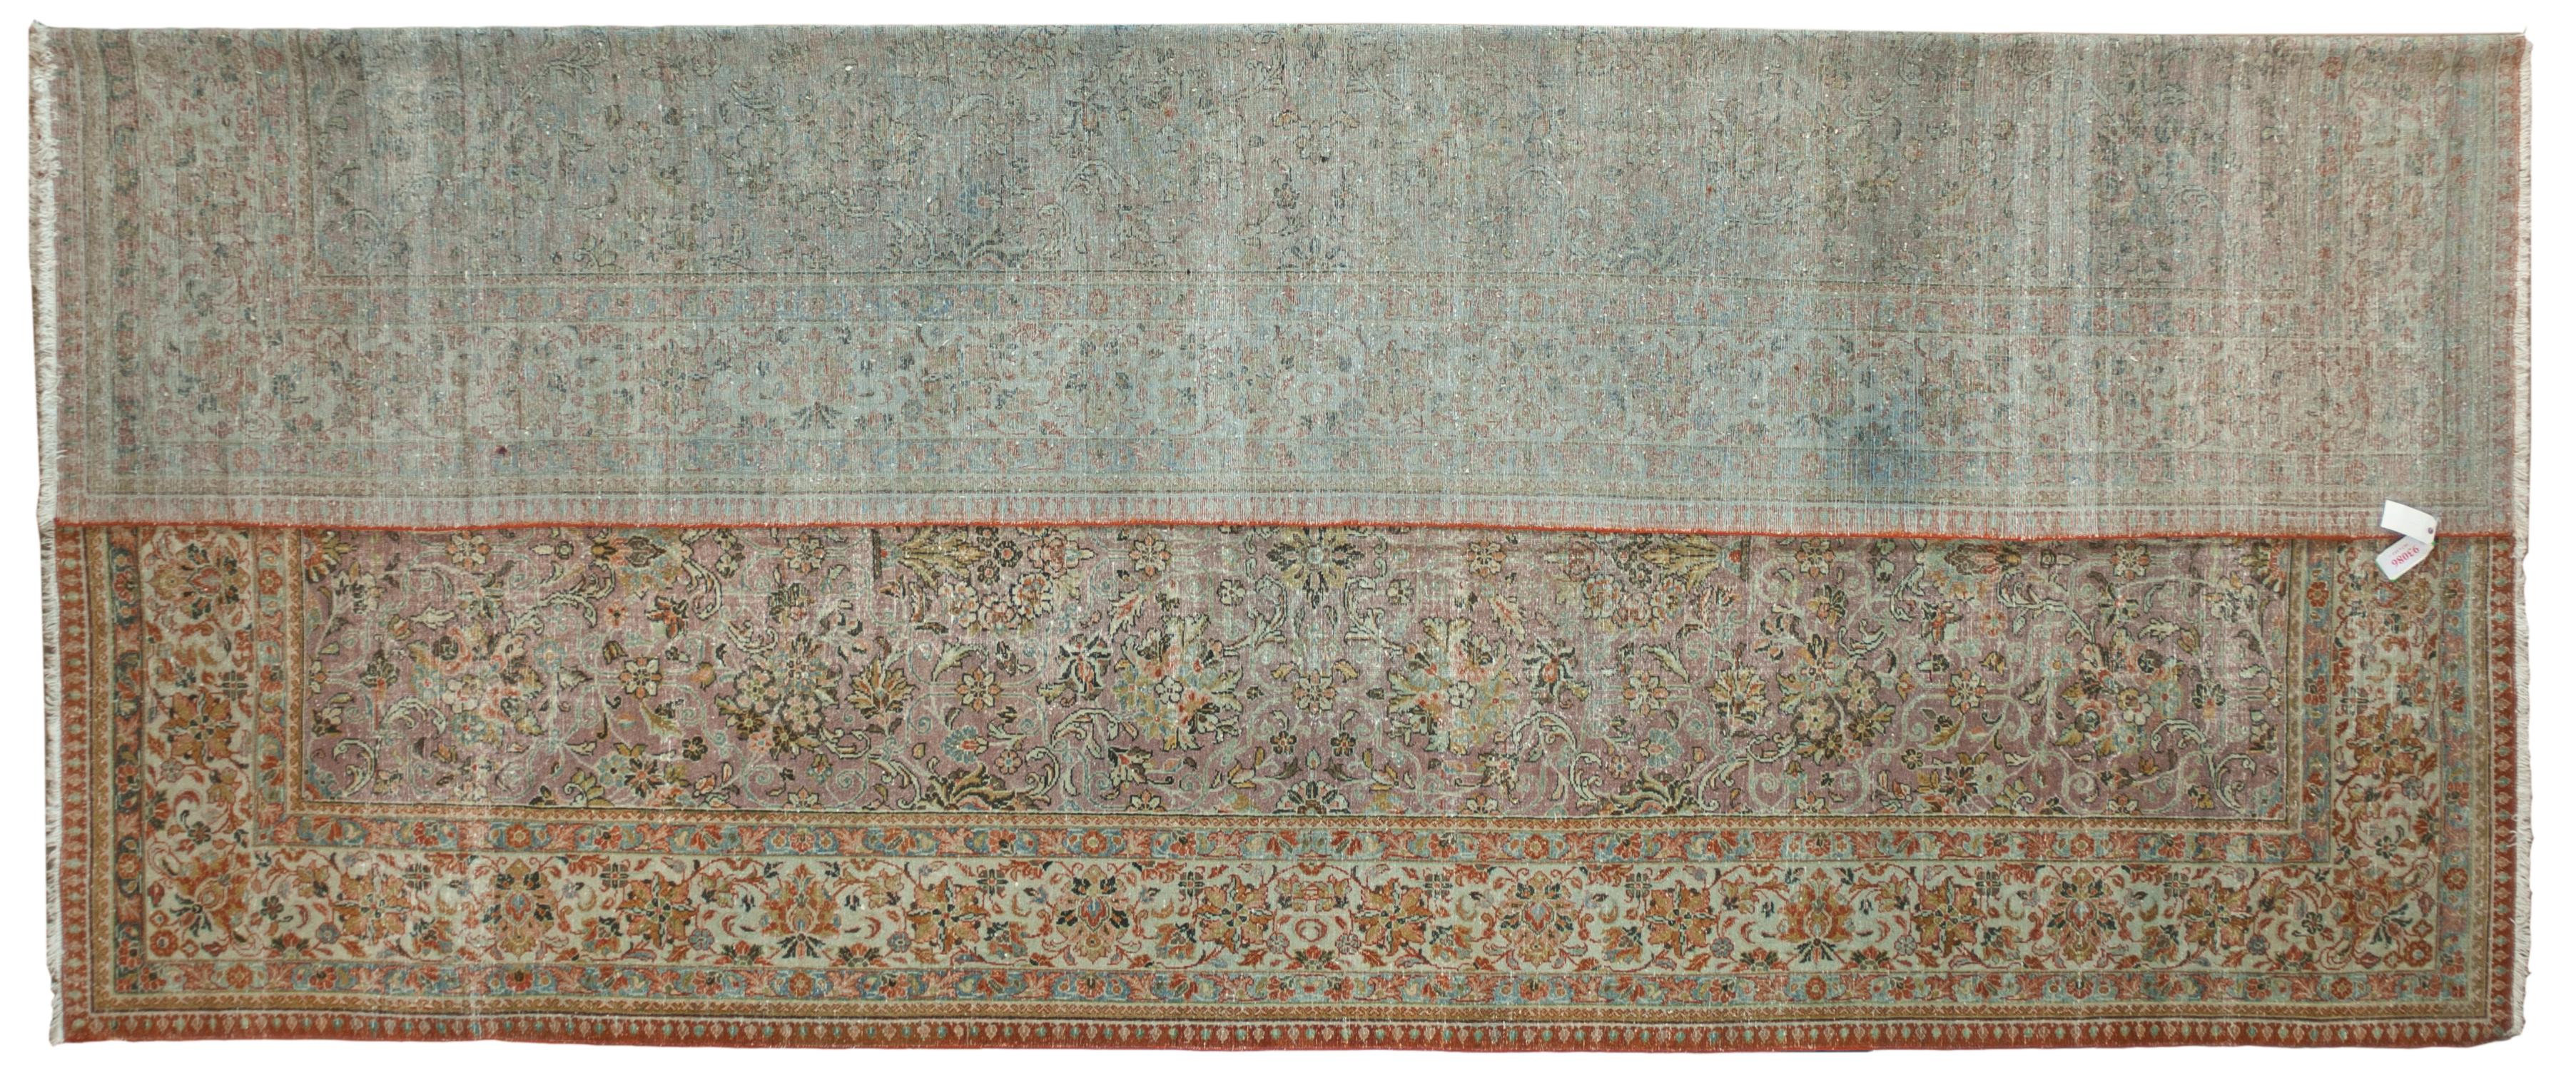 This antique distressed mahal is an all wool Handmade and Hand knotted rug. It has an all over design from the 20th century and was made in Iran. The name is derived from the Mahallat village where the rugs were crafted, and they are characterized